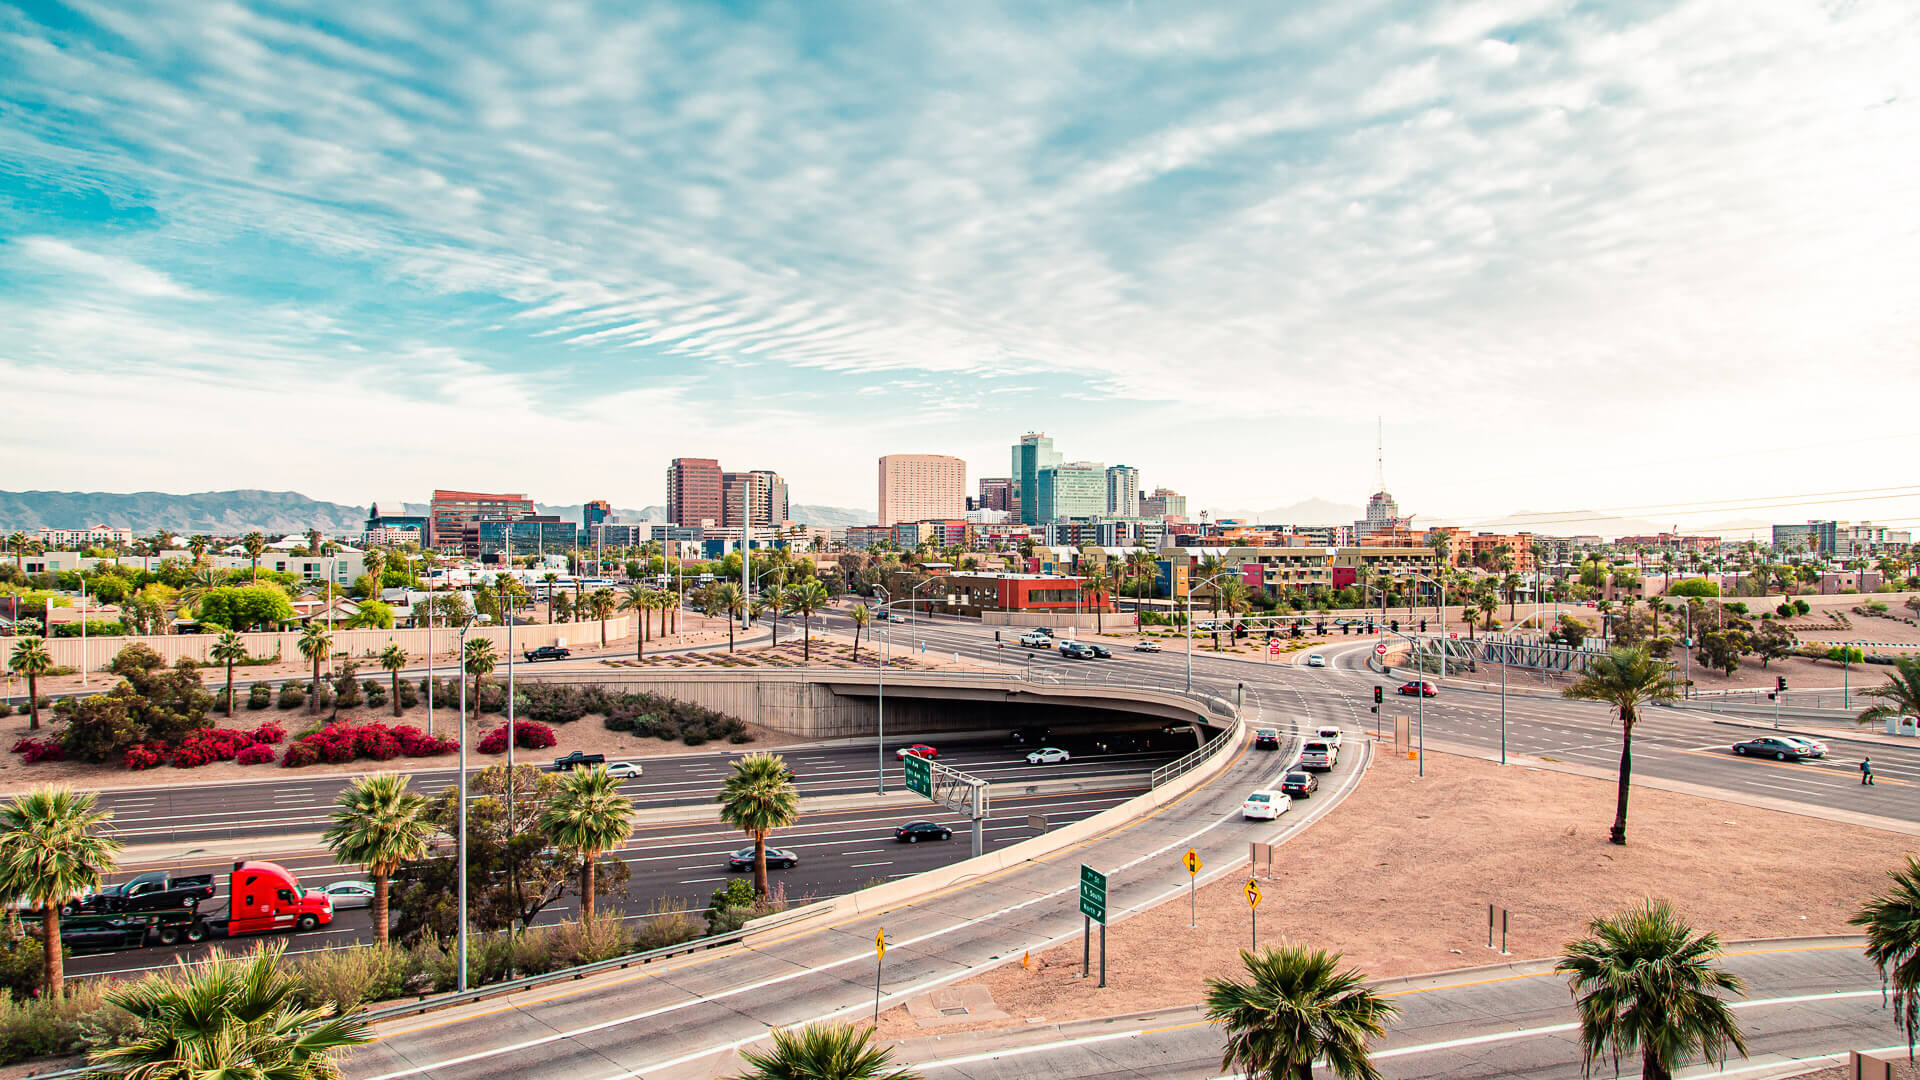 <p>One metric that’s bucking the growth trend is car rentals — at least in Arizona. In 2015, more than 55% of Cactus League attendees rented cars, but by 2018 that number had fallen to just above 30%. As the study points out, visitors are more likely to be affluent in recent years and higher-income families are less likely to rent cars. The timeline also coincides with the rise of rideshare services like Uber and Lyft, which could mean that side hustlers are pocketing a bigger share of spring training profits.</p>